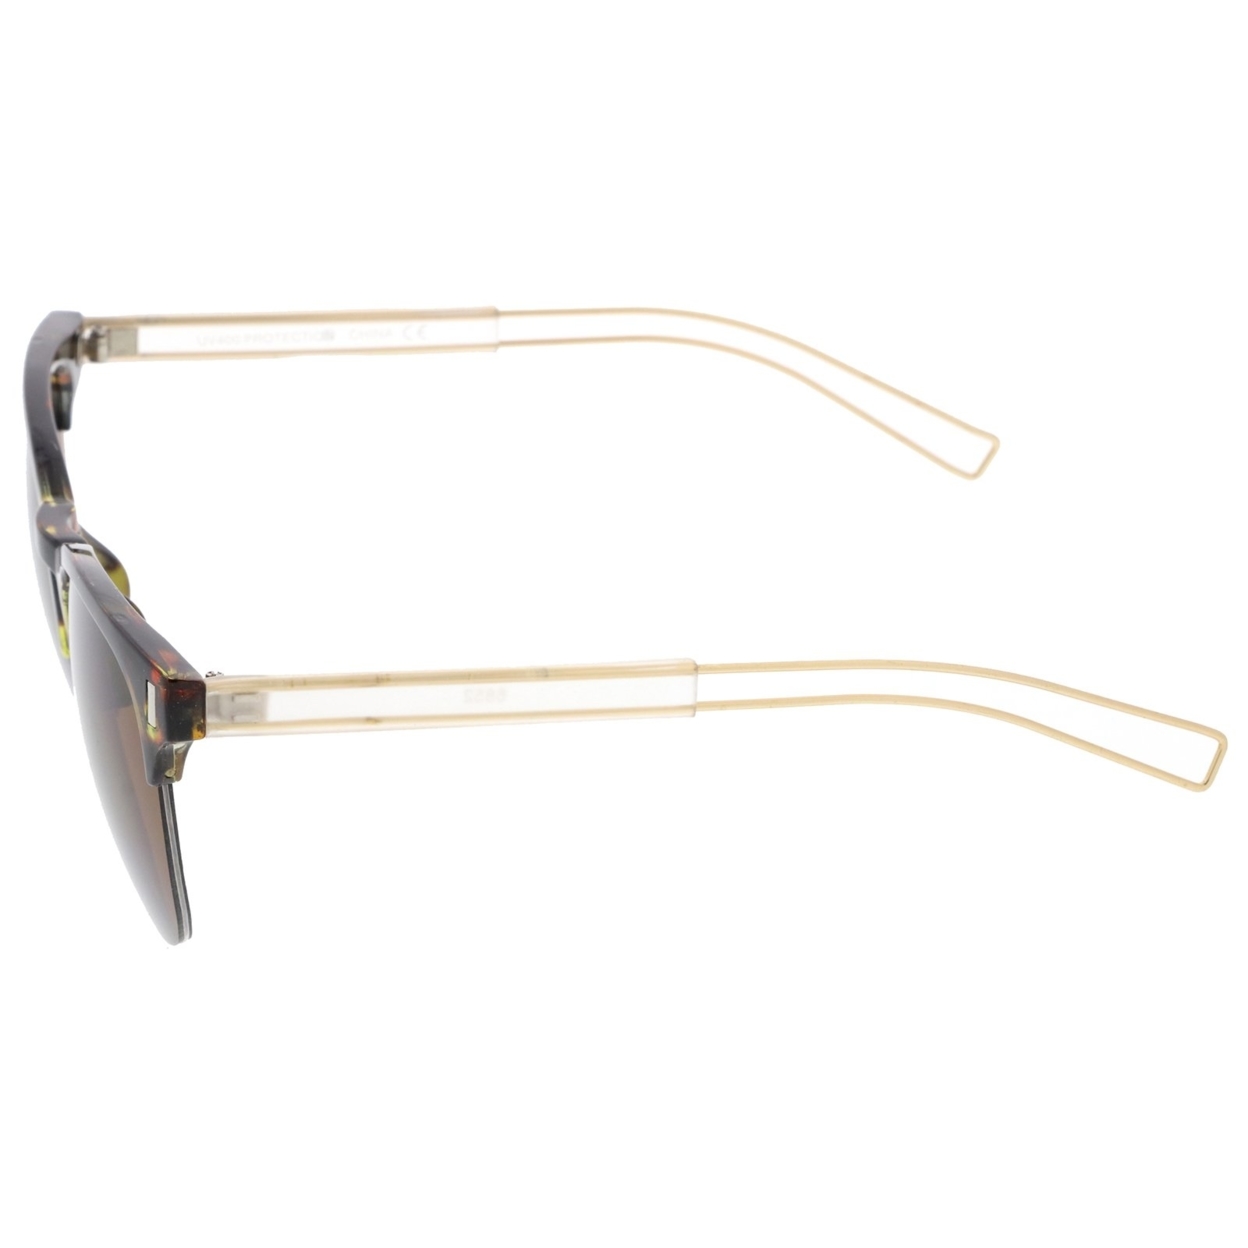 Semi Rimless Wire Hook Temples Square Lens Horn Rimmed Sunglasses 56mm - Black-Gold / Green